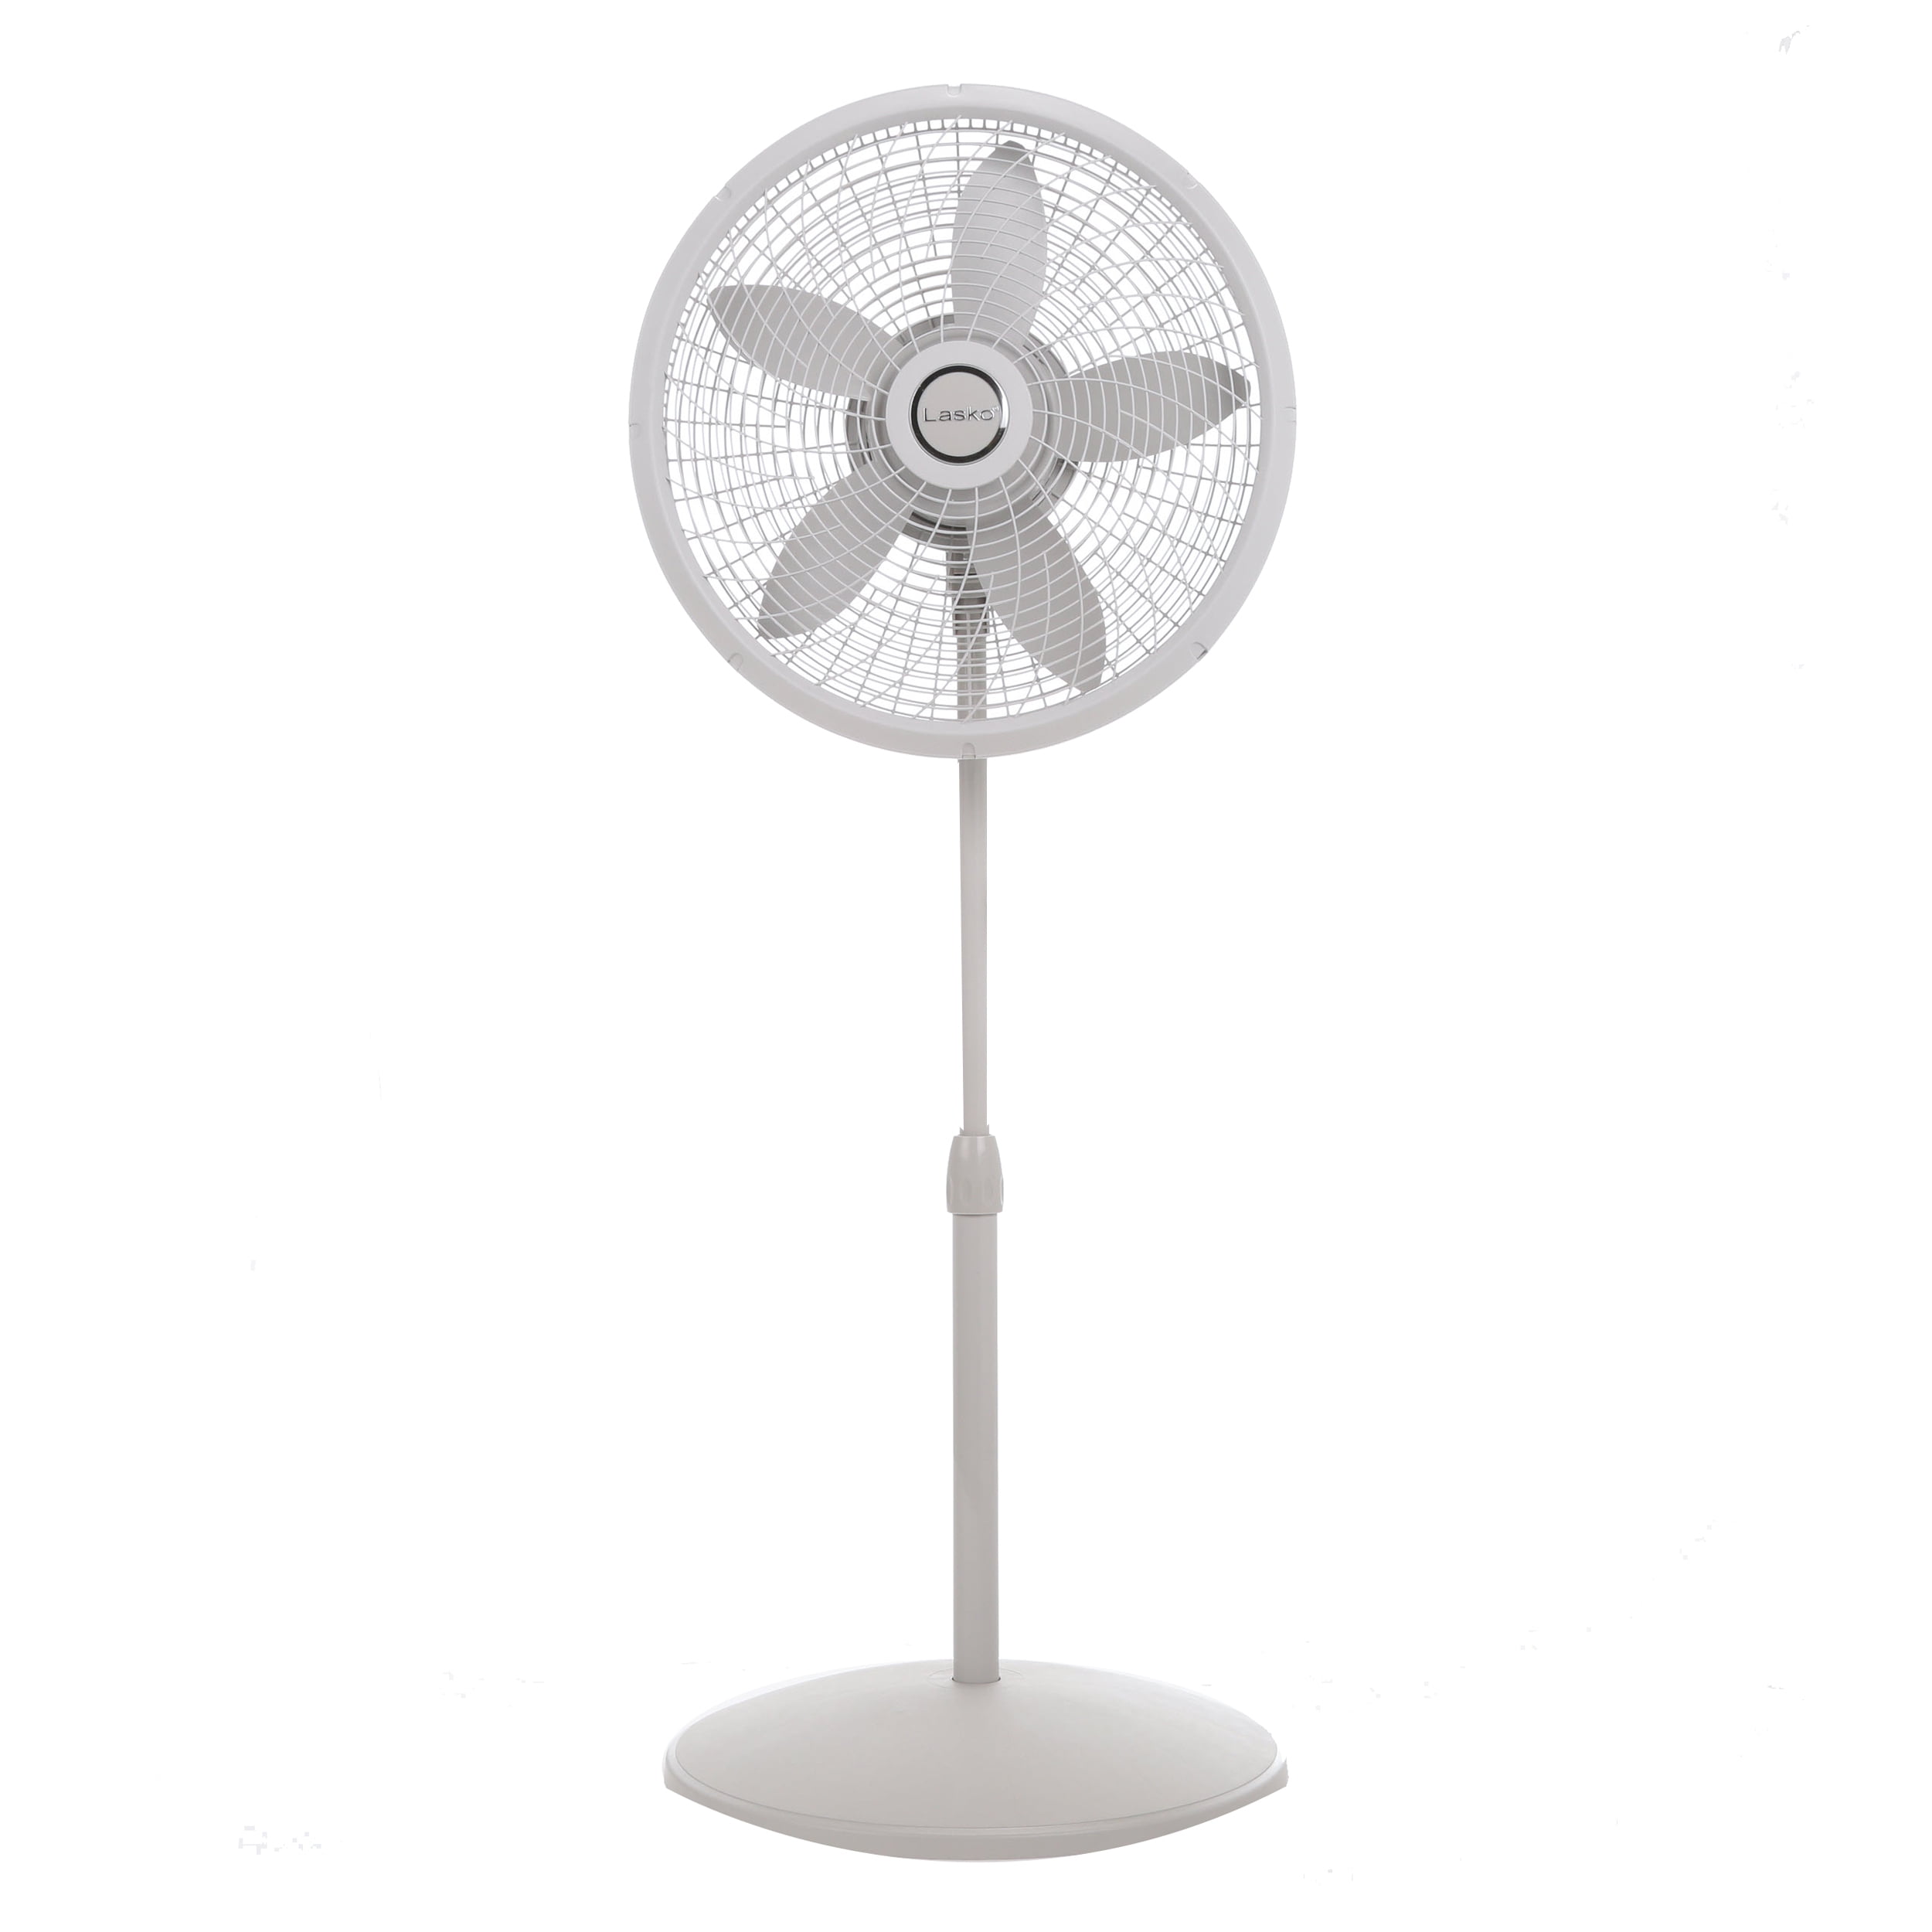 Lasko 18" 3-Speed Oscillating Cyclone Pedestal Fan with Remote Control and Timer